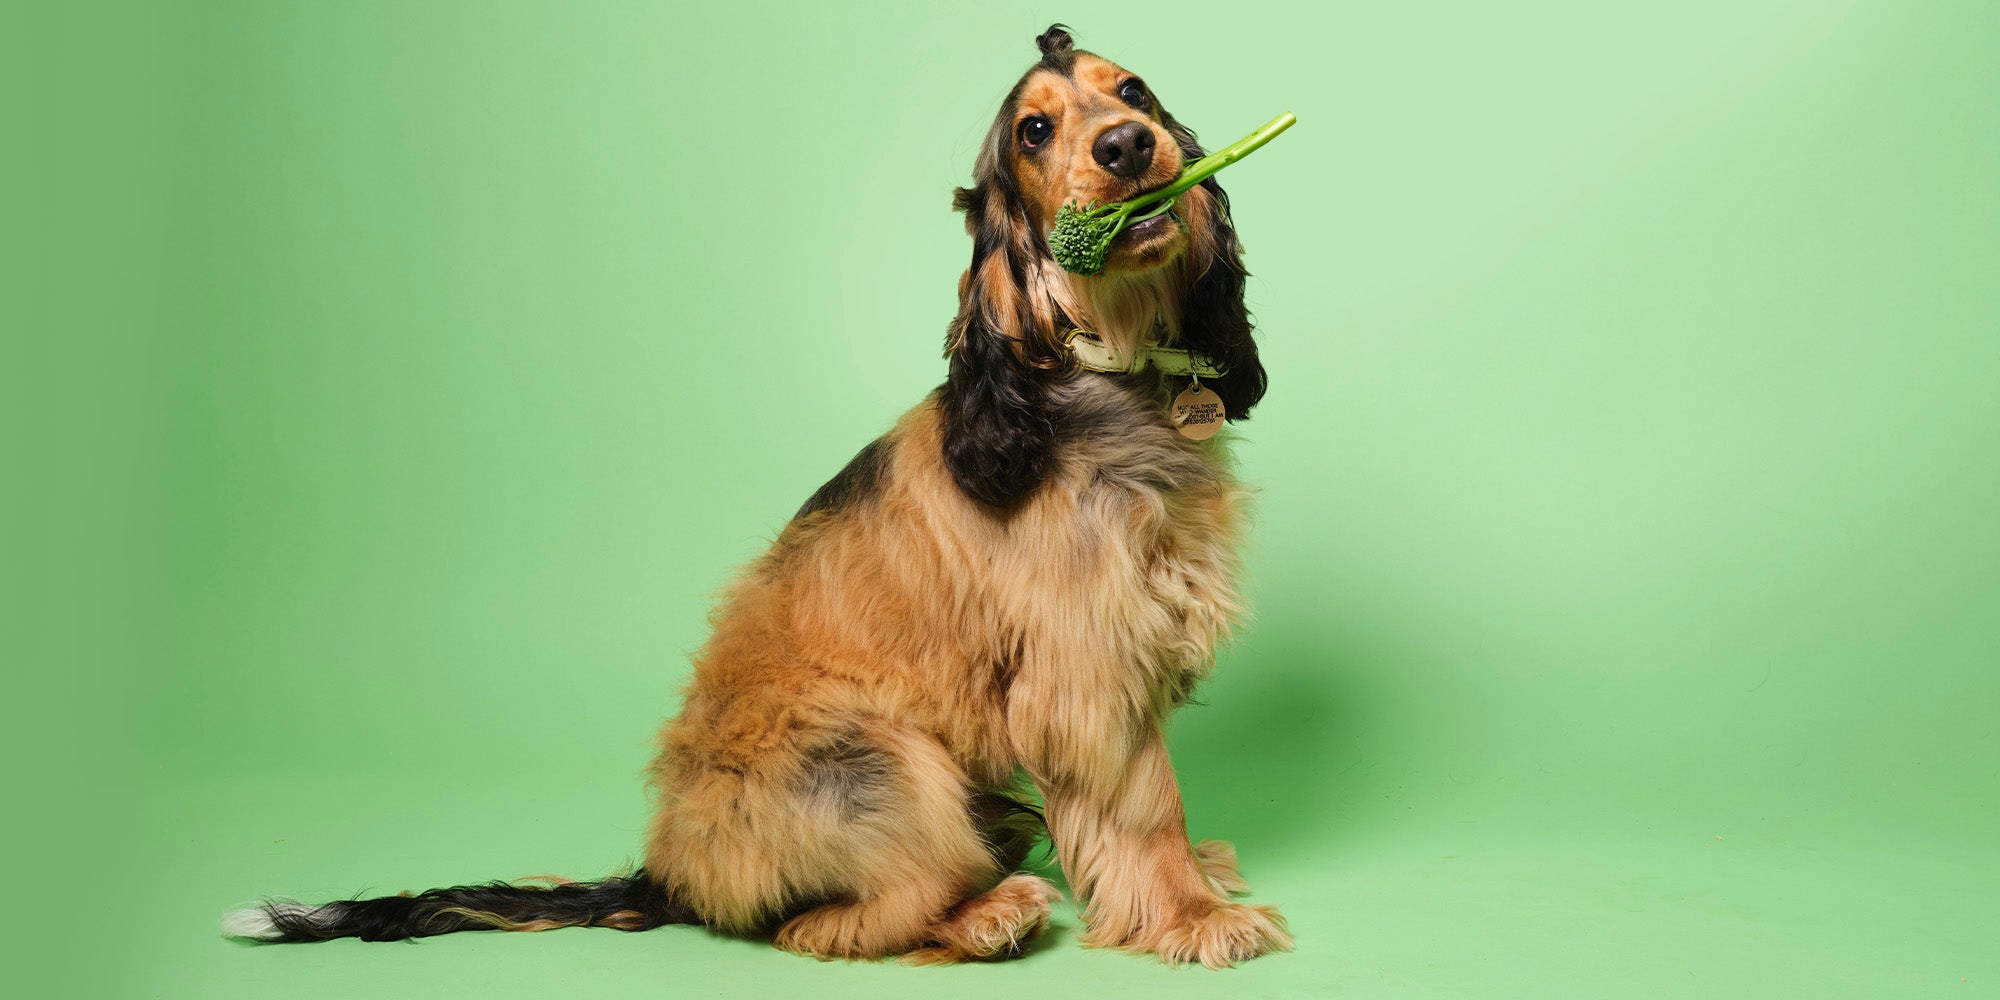 Show cocker dog, with broccoli in its mouth, against a pale green background